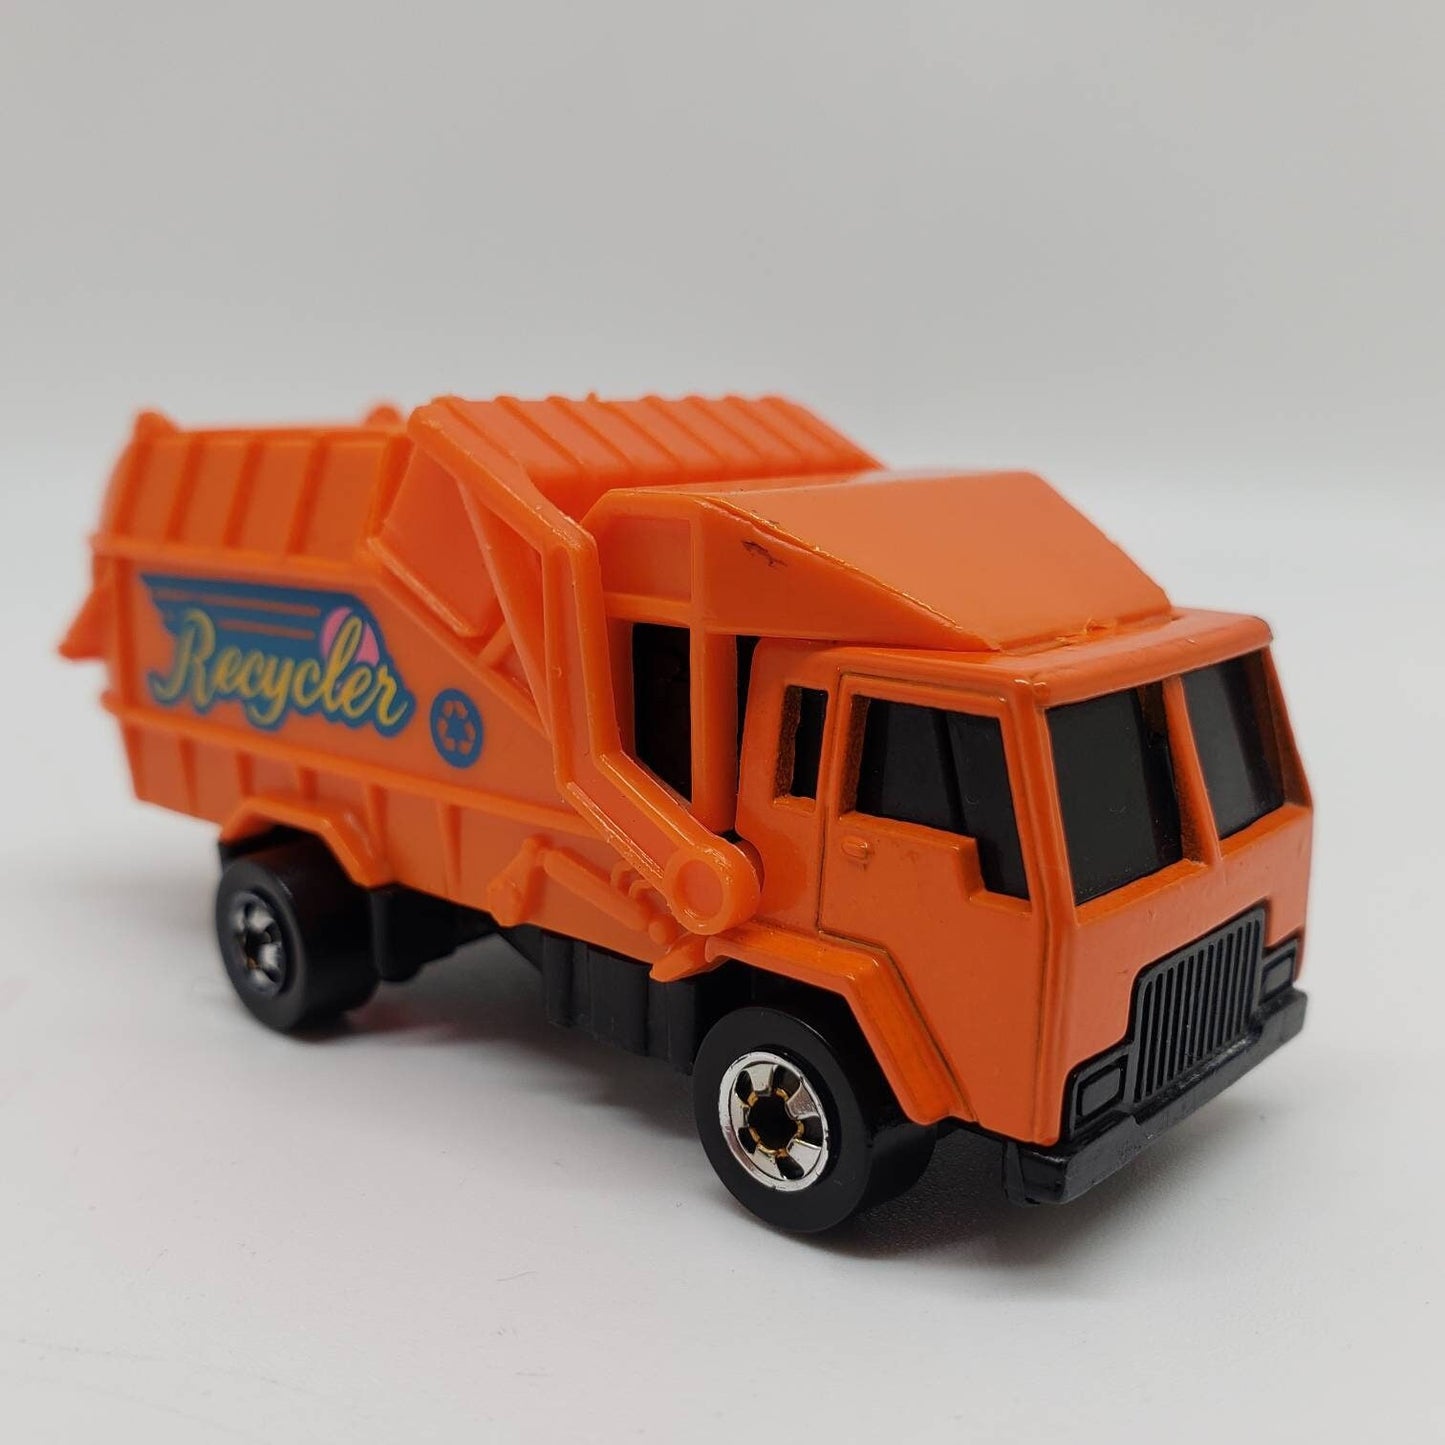 Recycling Truck - Recycler - Diecast Vintage - Diecast Collectible - Miniature Model Toy Car - Hot Wheels Car - Hot Wheels